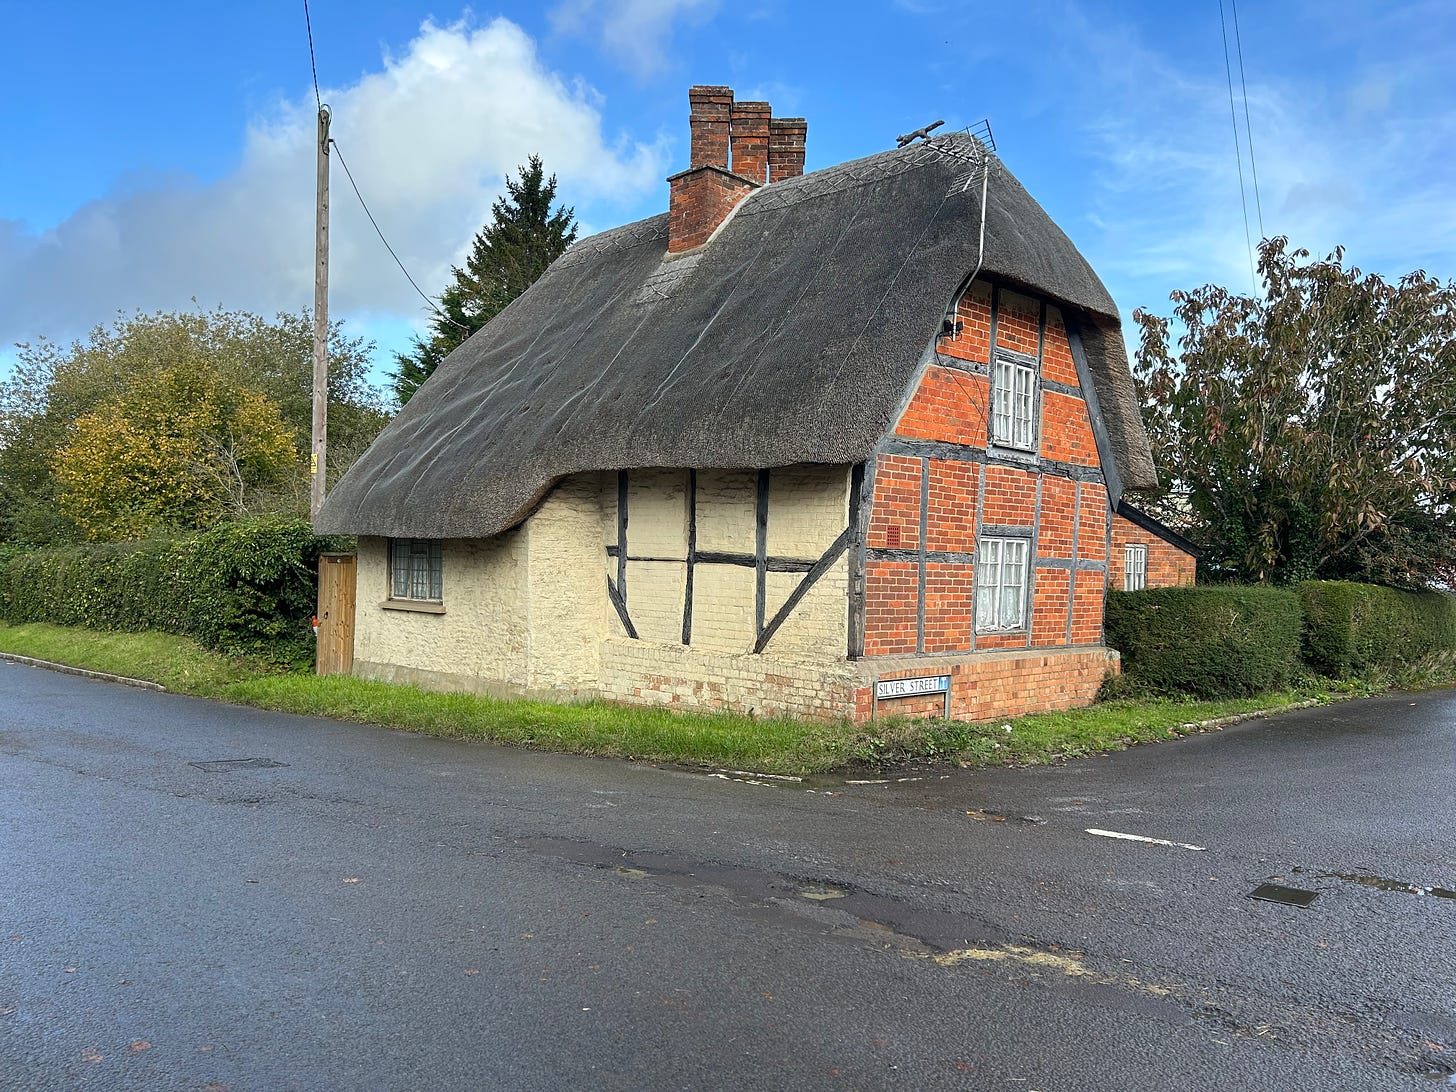 A thatched cottage, Silver Street, Steeple Ashton, Wiltshire. Image: Roland's Travels